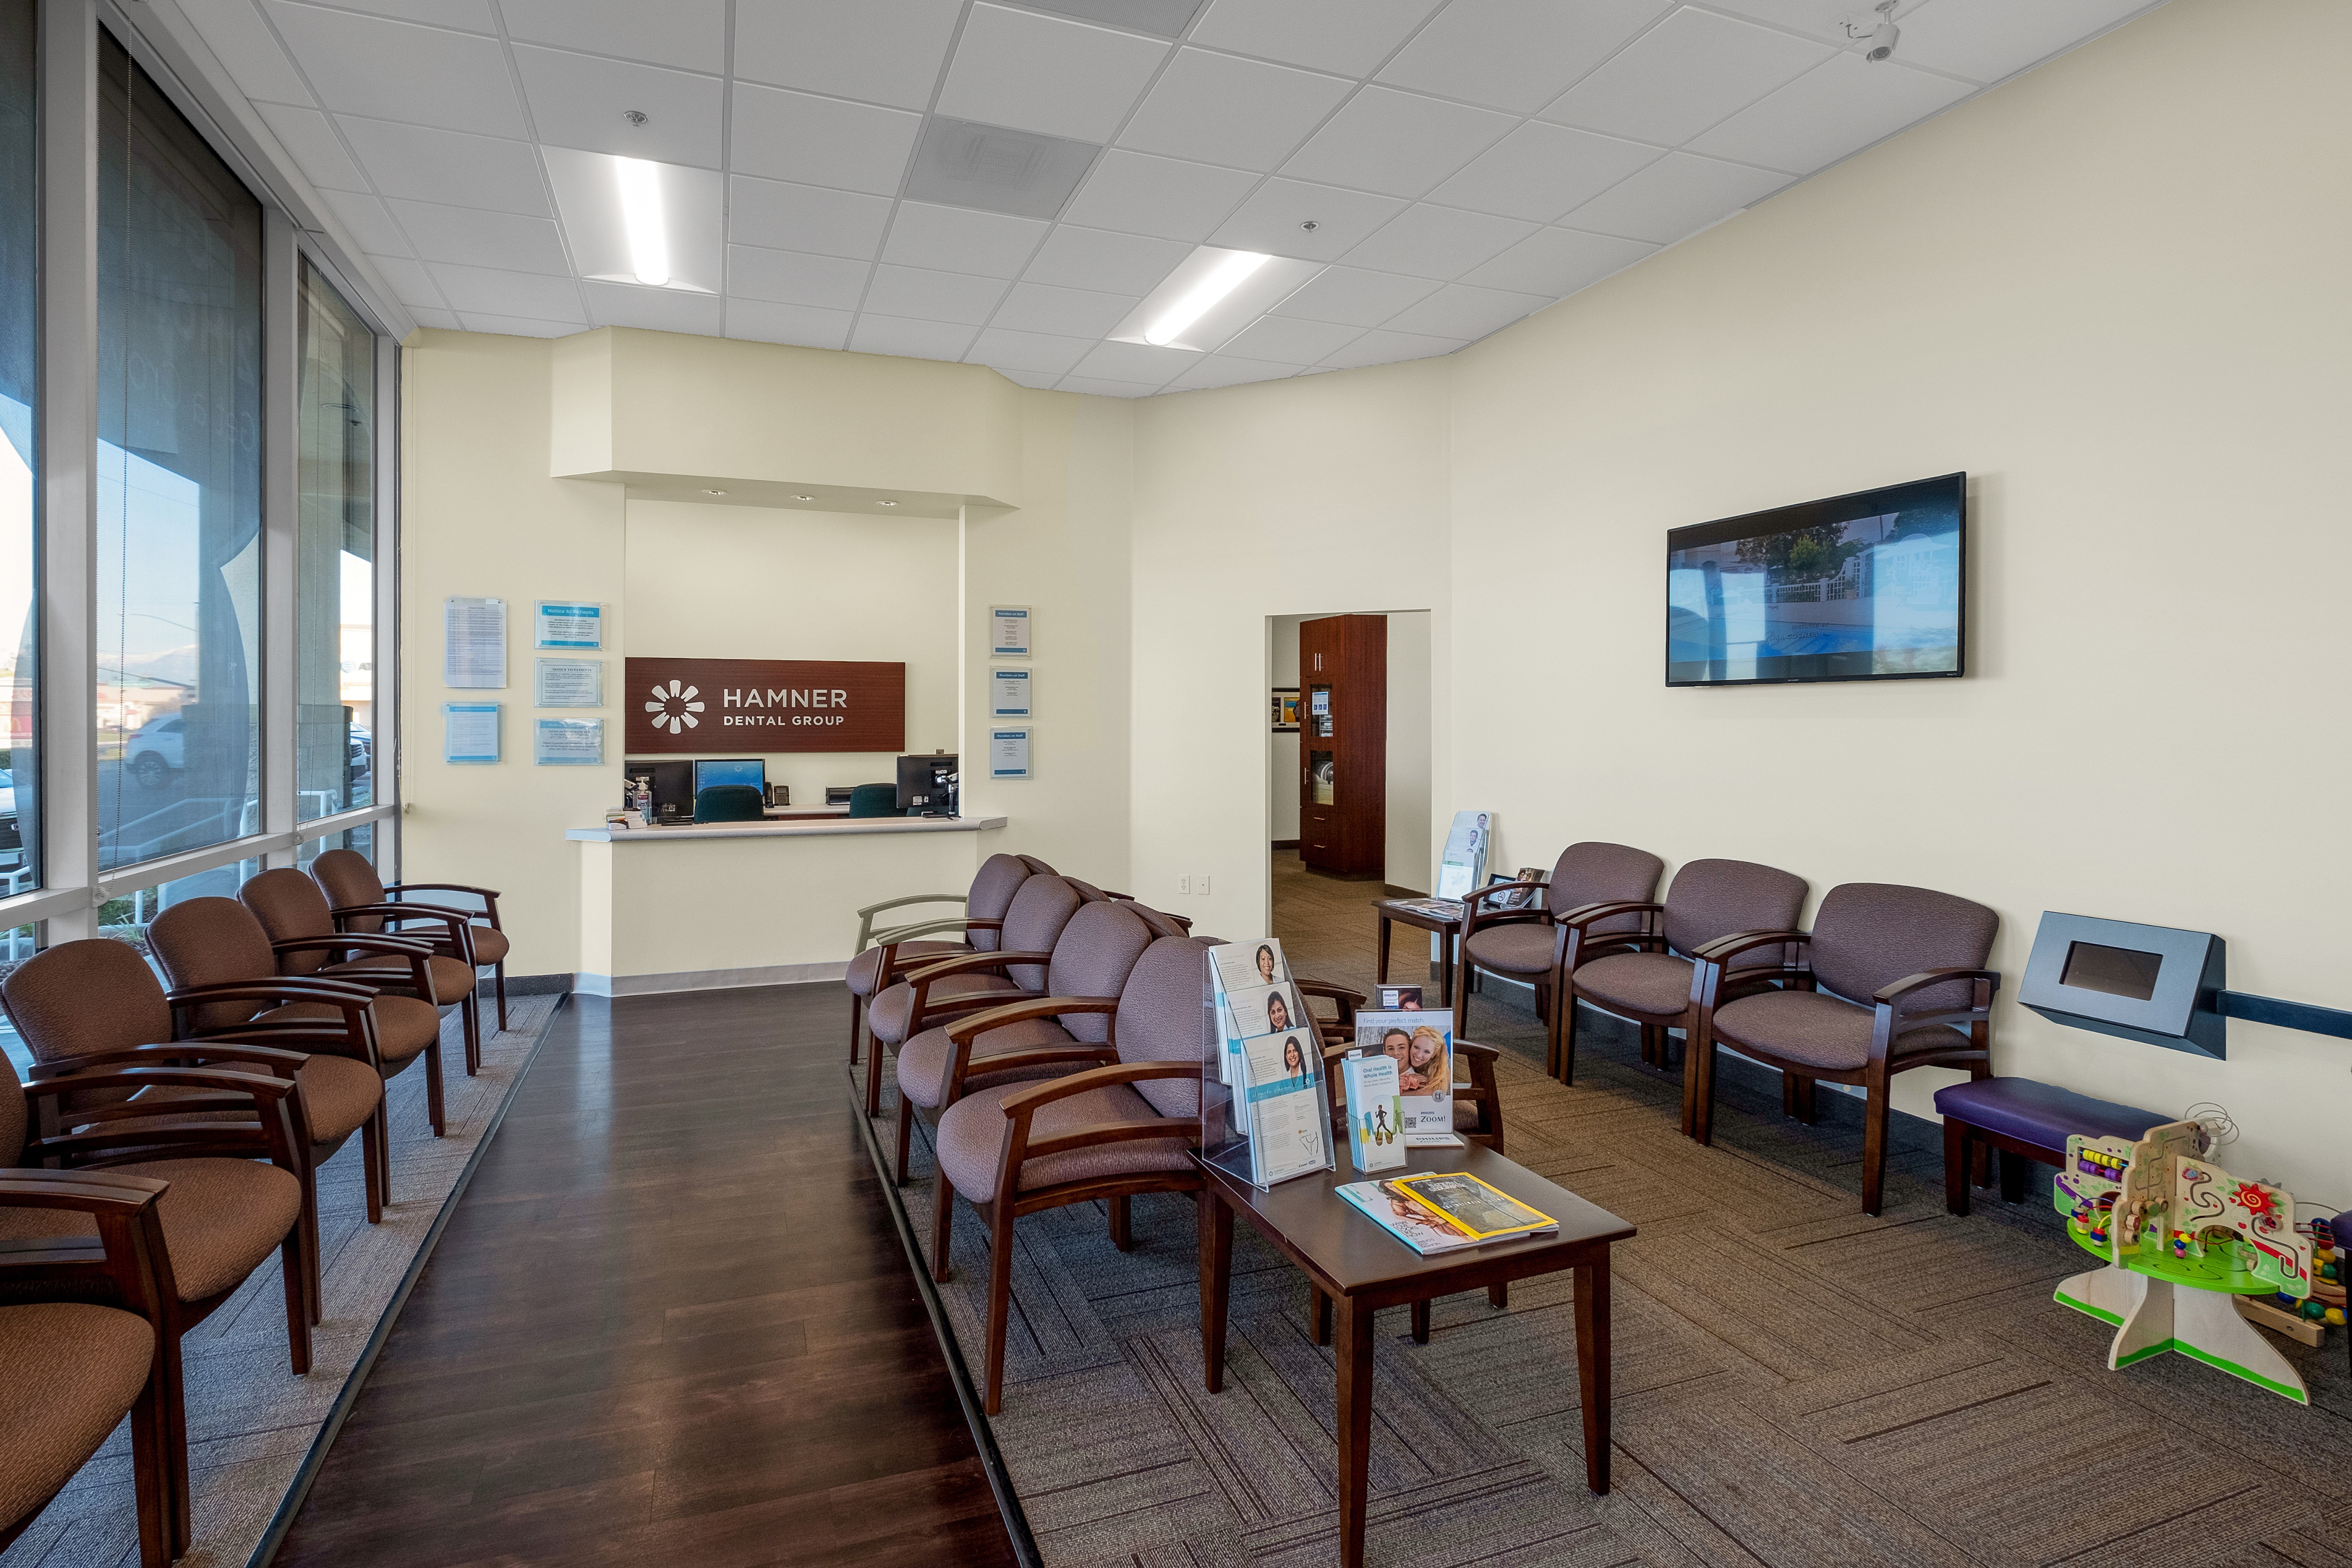 Hamner Dental Group and Orthodontics opened its doors to the Norco community in February 2006!